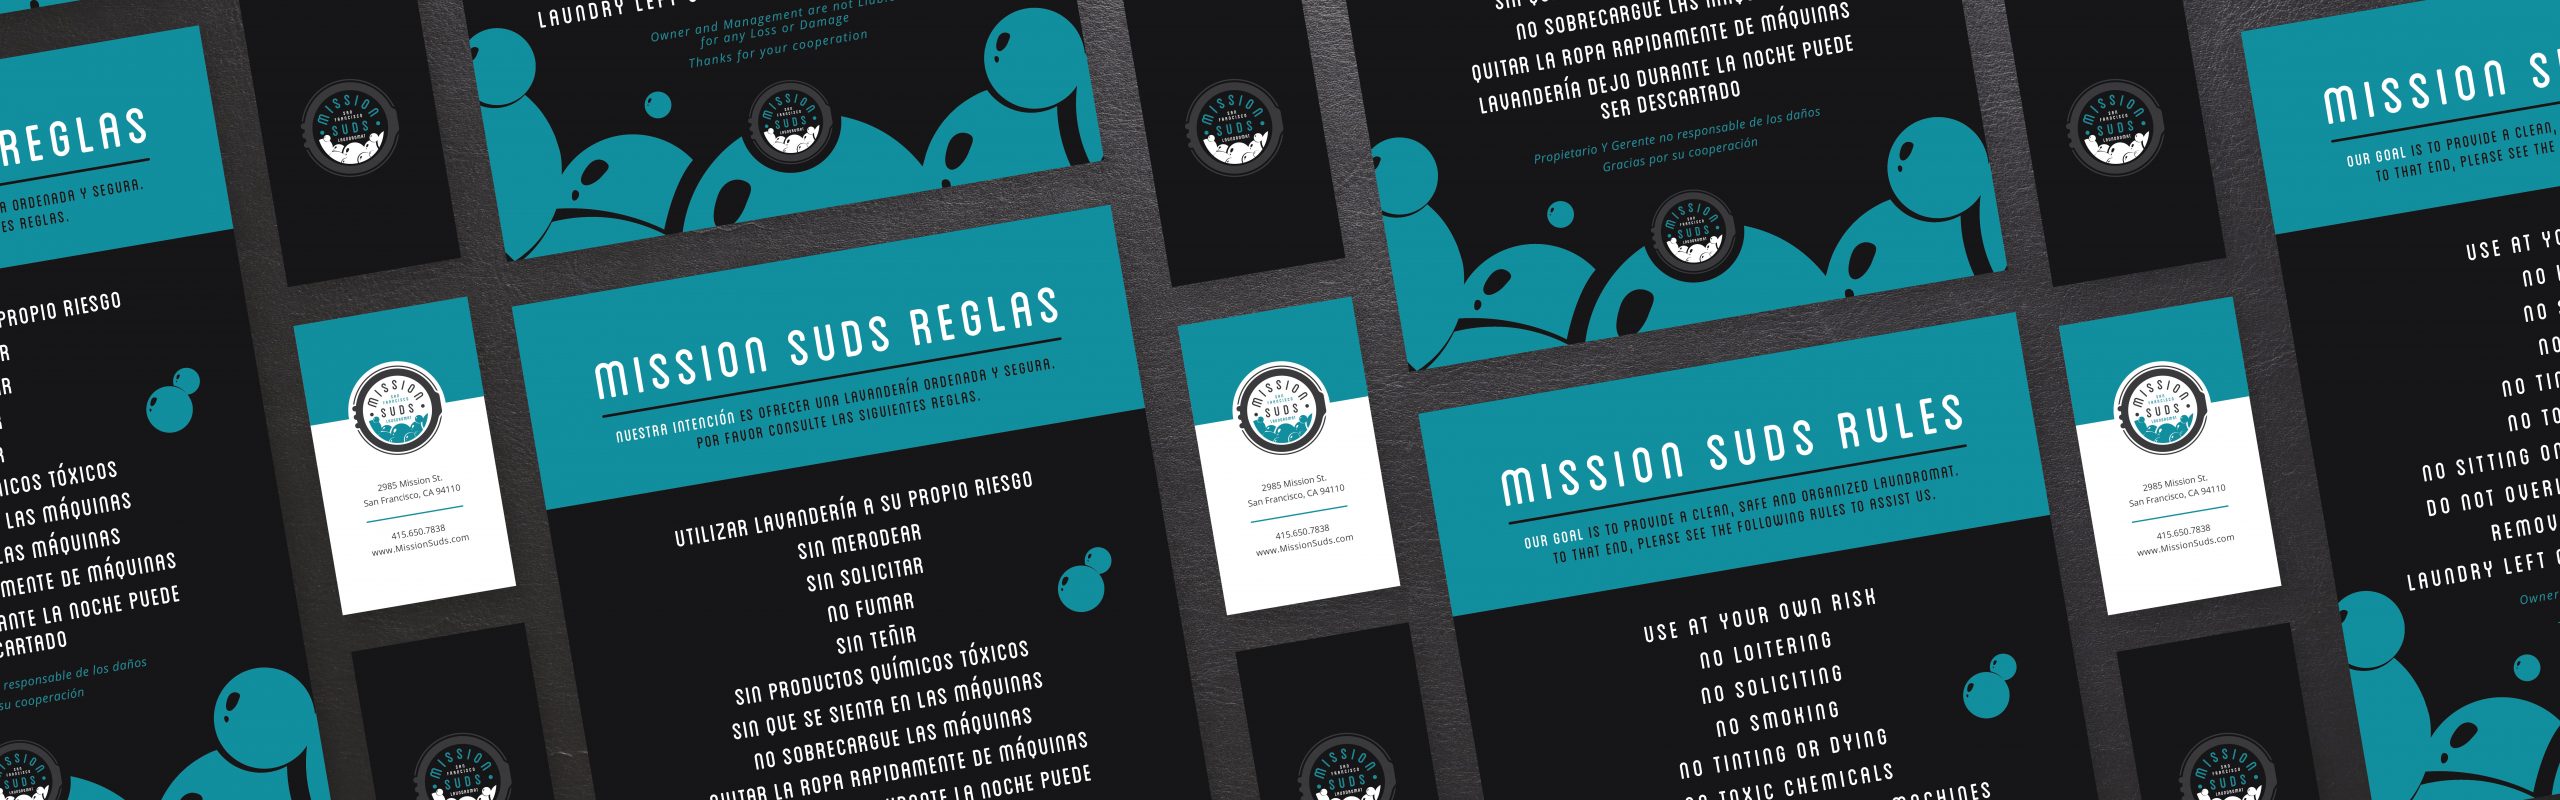 A collection of printed materials with a consistent turquoise and black color scheme, featuring text and graphic elements pertaining to a "Mission Suds" theme.